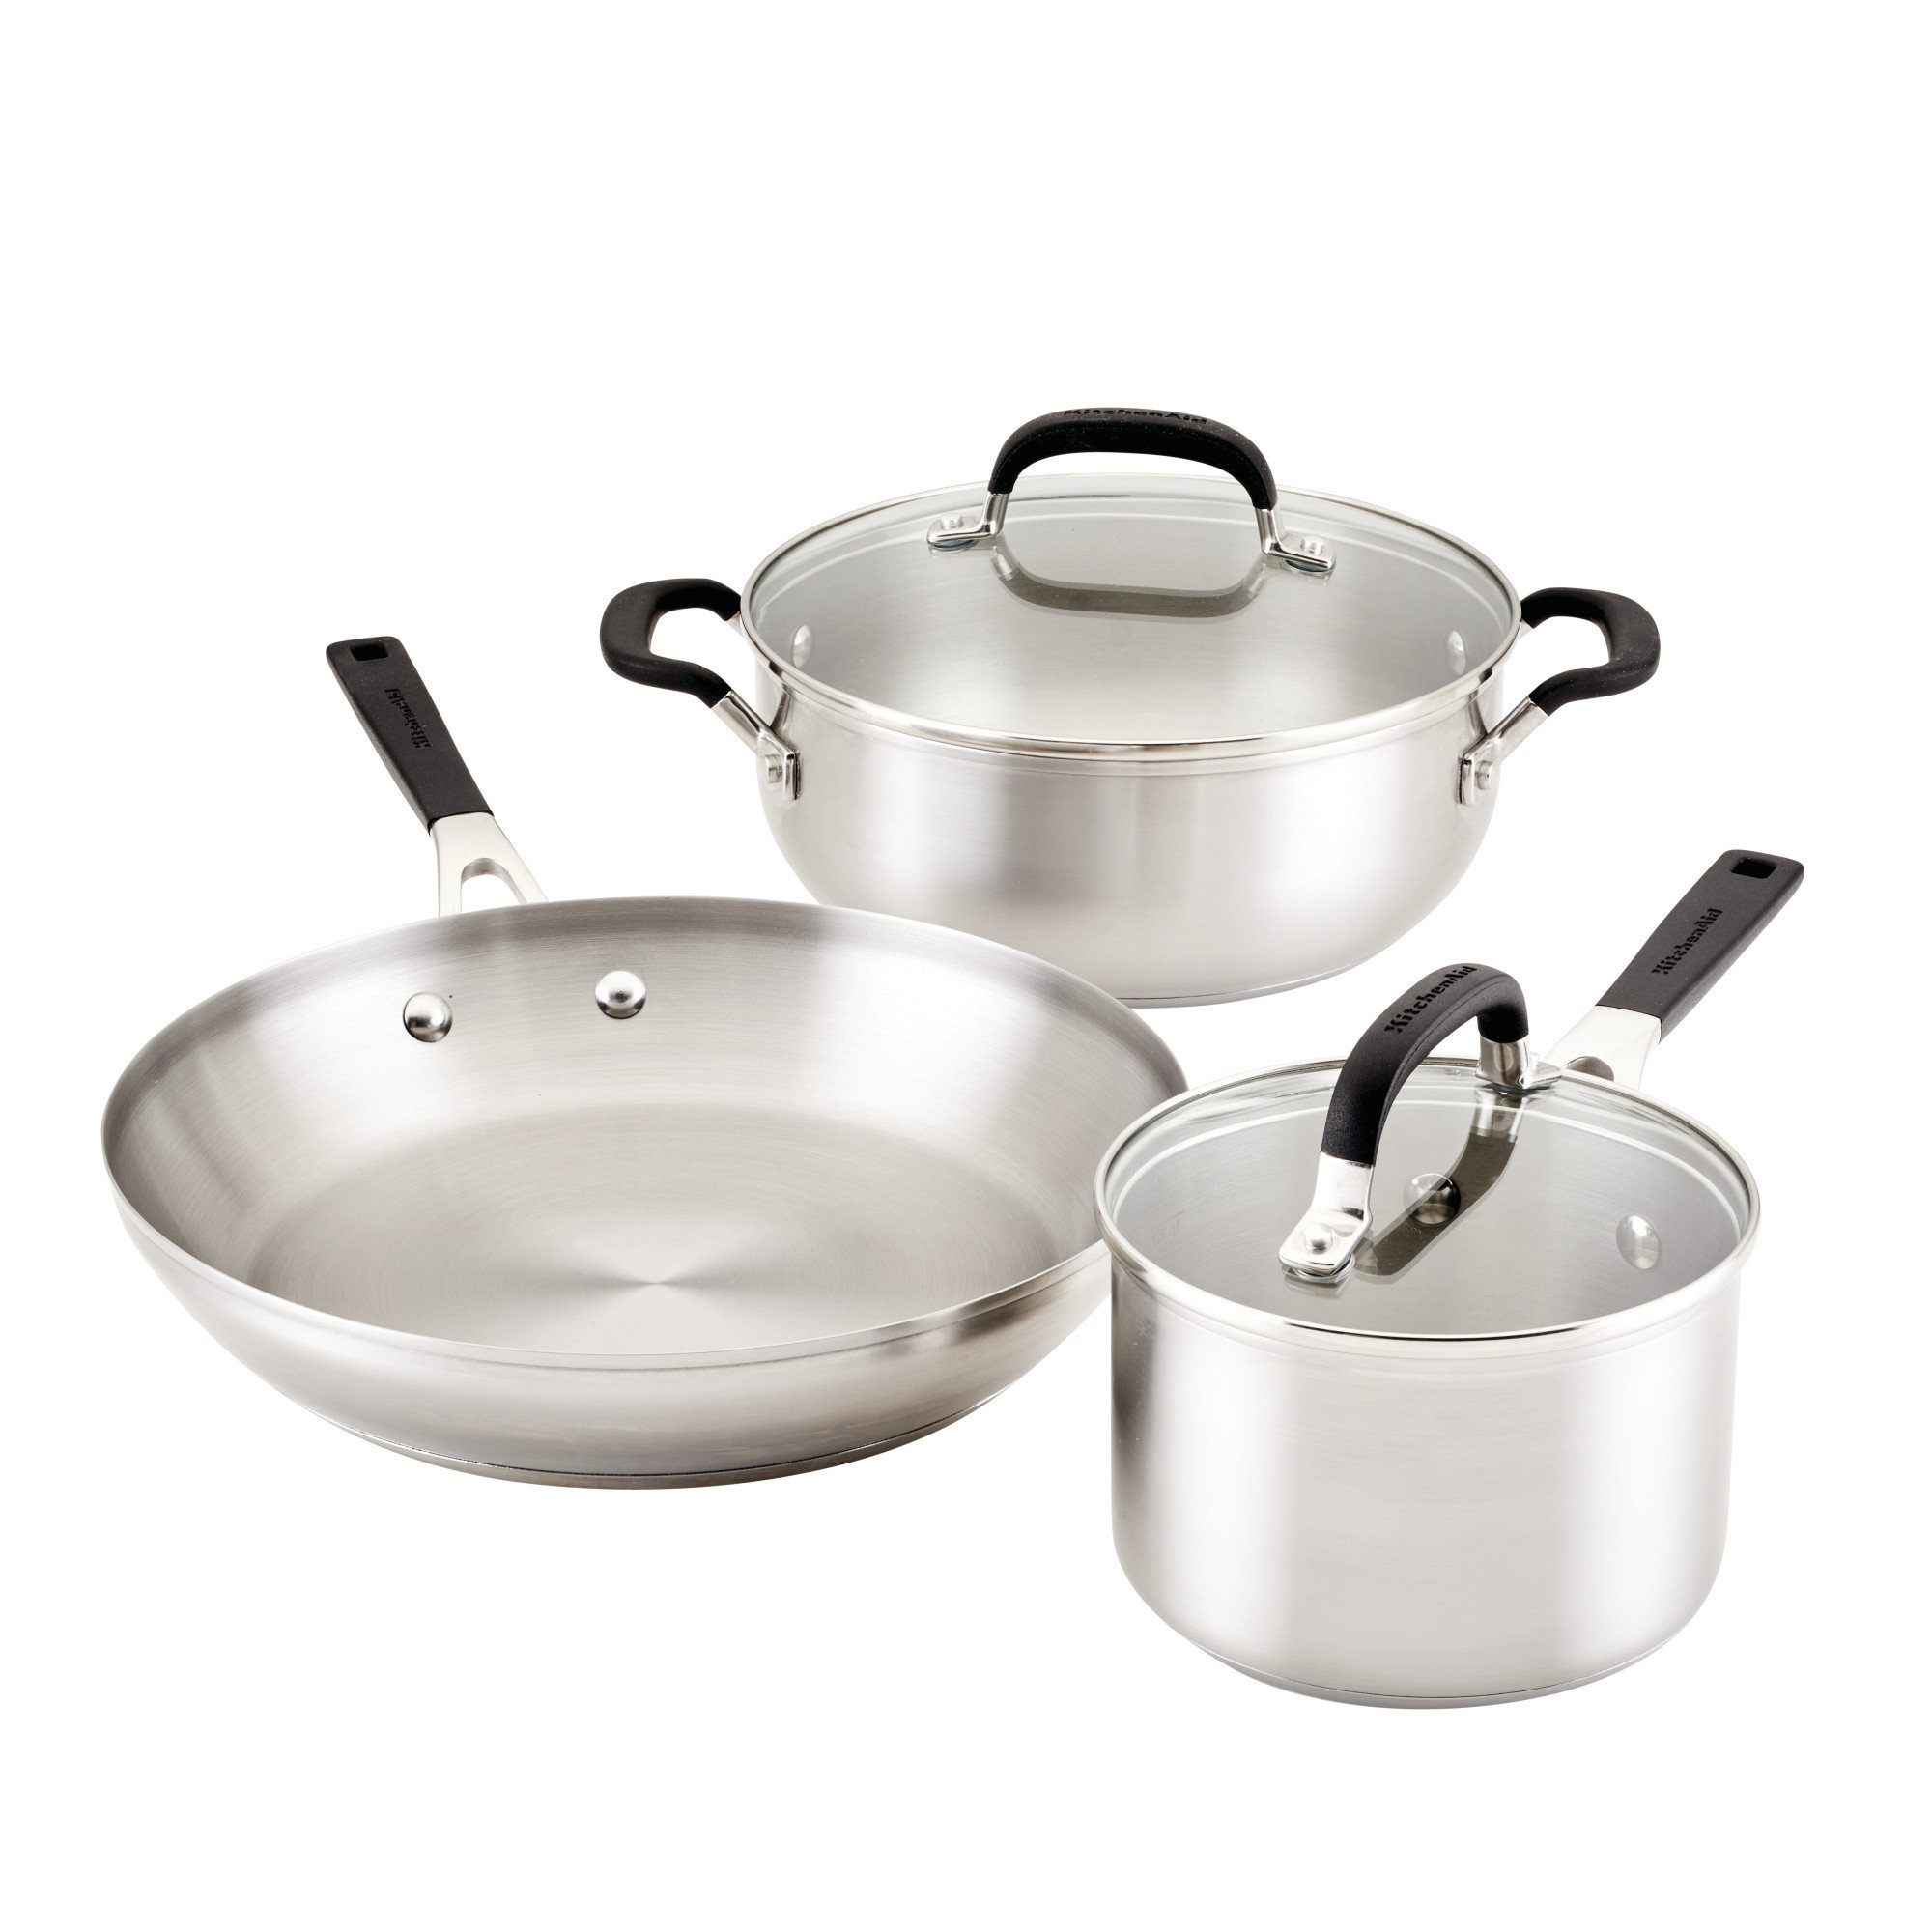 KitchenAid 5-Ply Clad Stainless Steel Cookware Pots and Pans Set, 10 Piece,  Polished Stainless